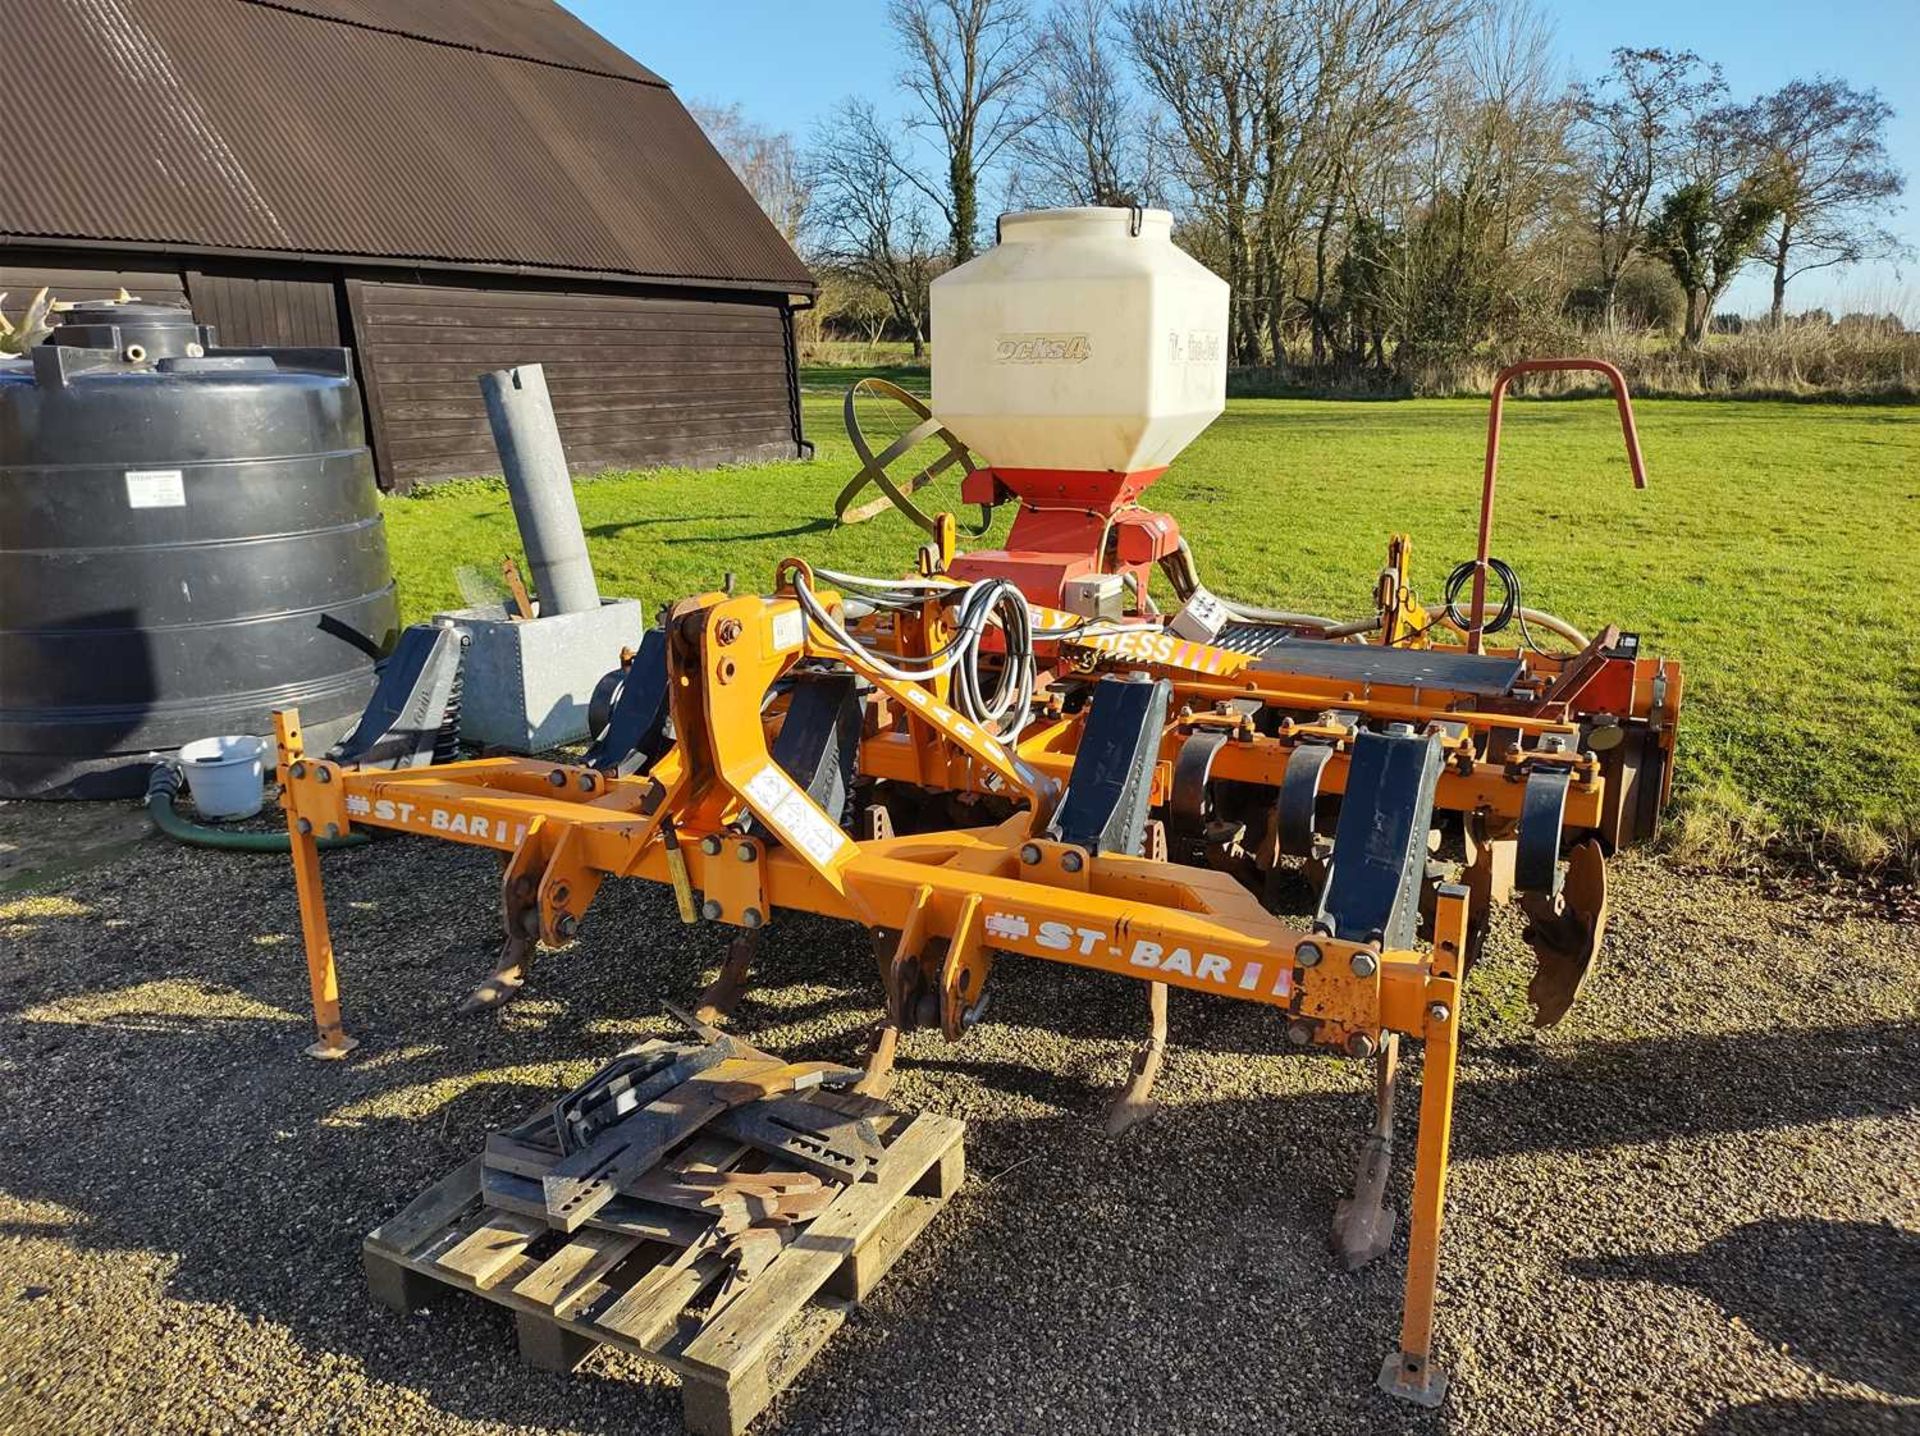 Simba X Press 3m with 5 Leg ST Bar and Stocks Wizard Electric Seeder - Image 4 of 6